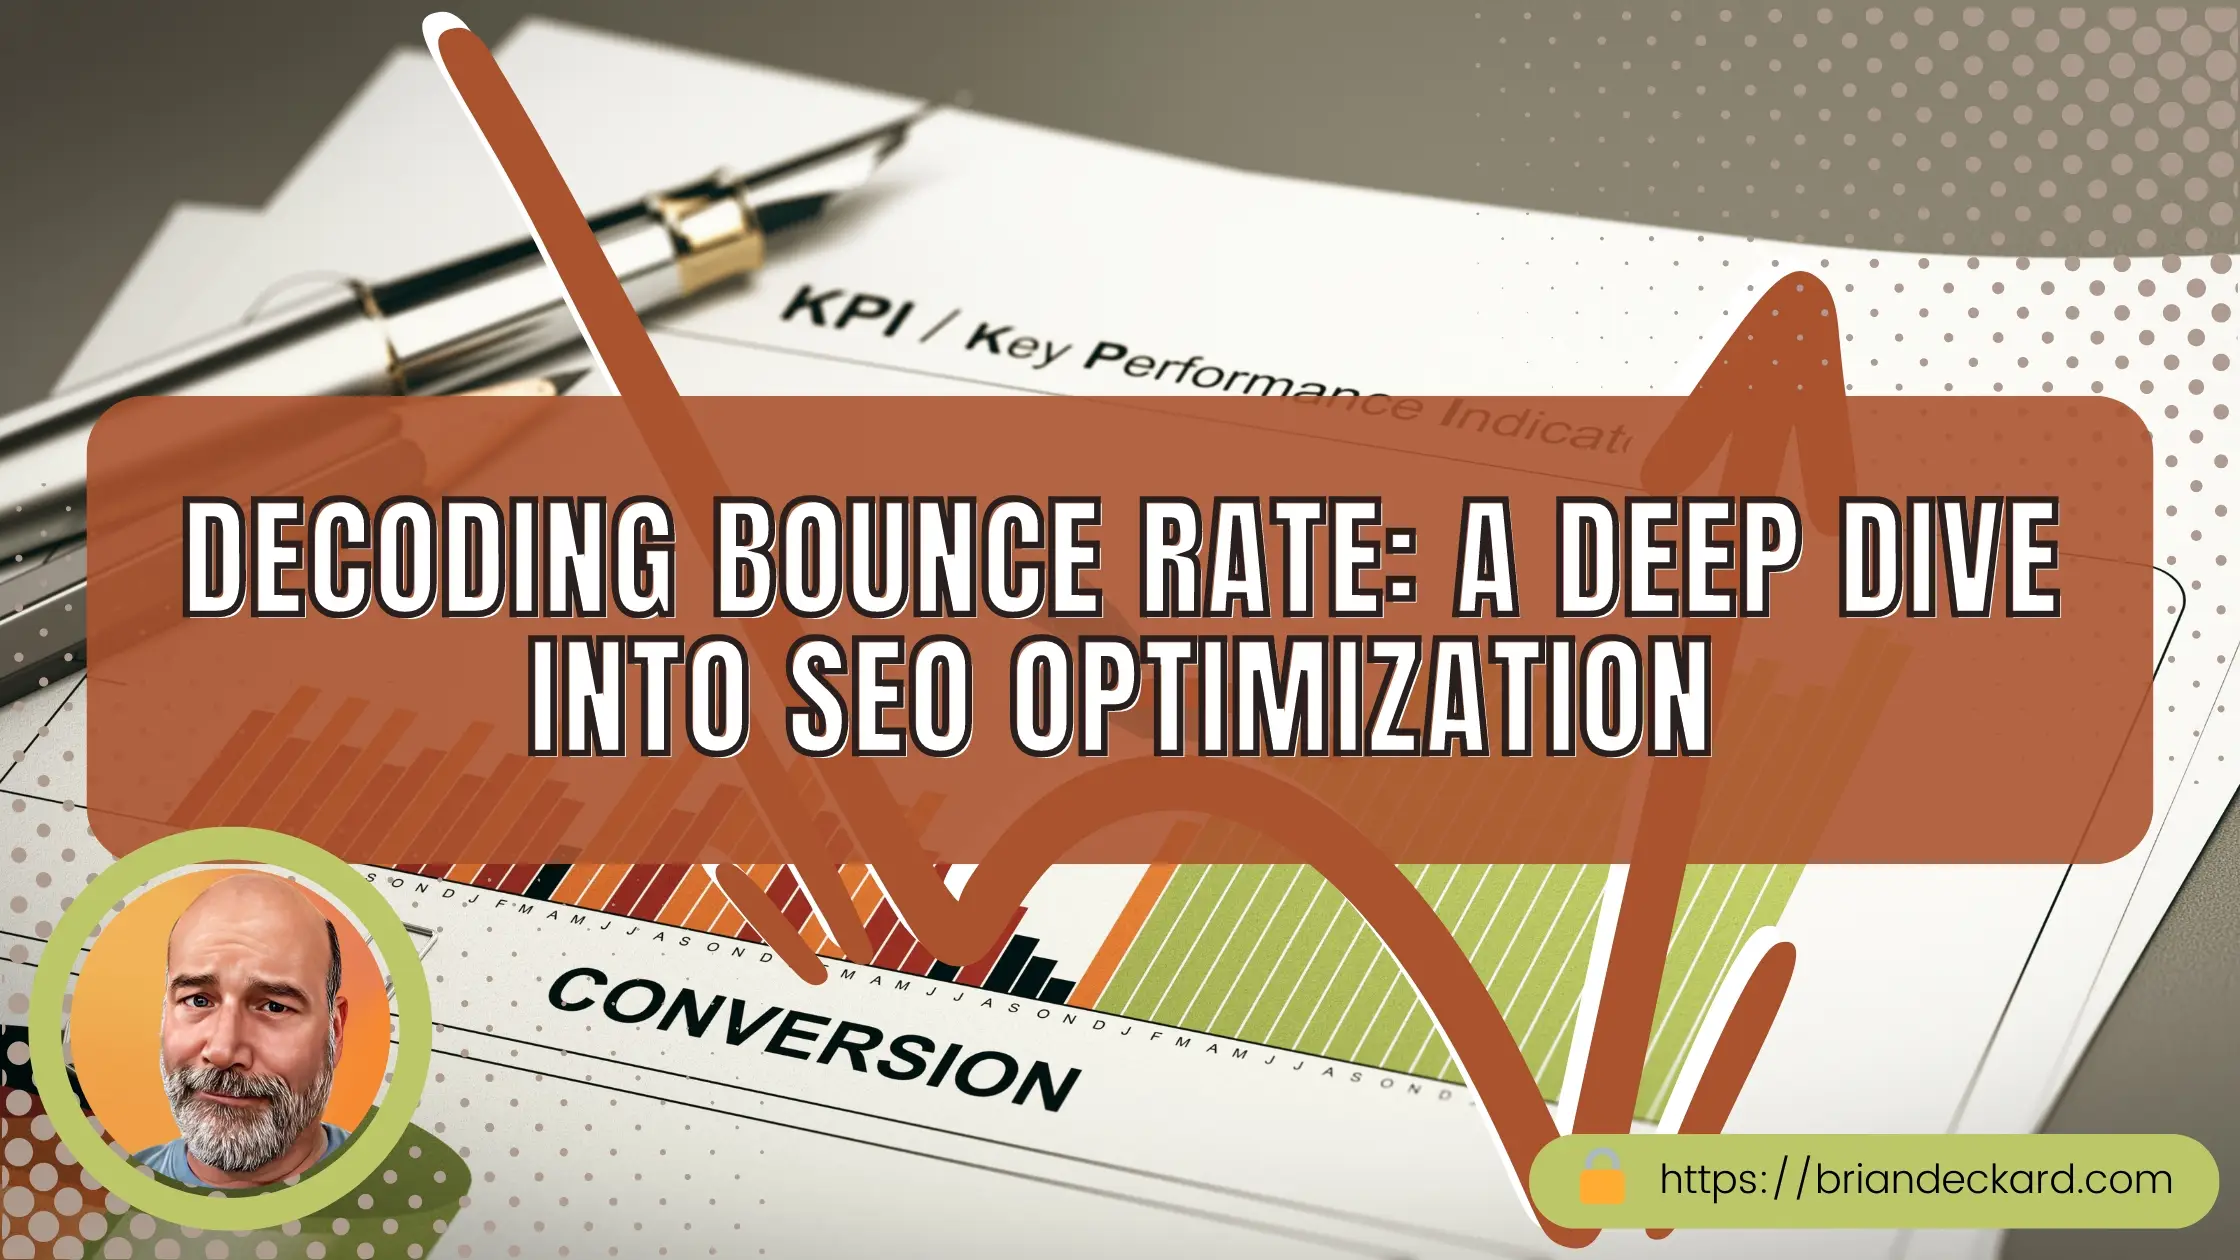 Decoding Bounce Rate A Deep Dive into SEO Optimization with Brian Deckard of Deckard & Company